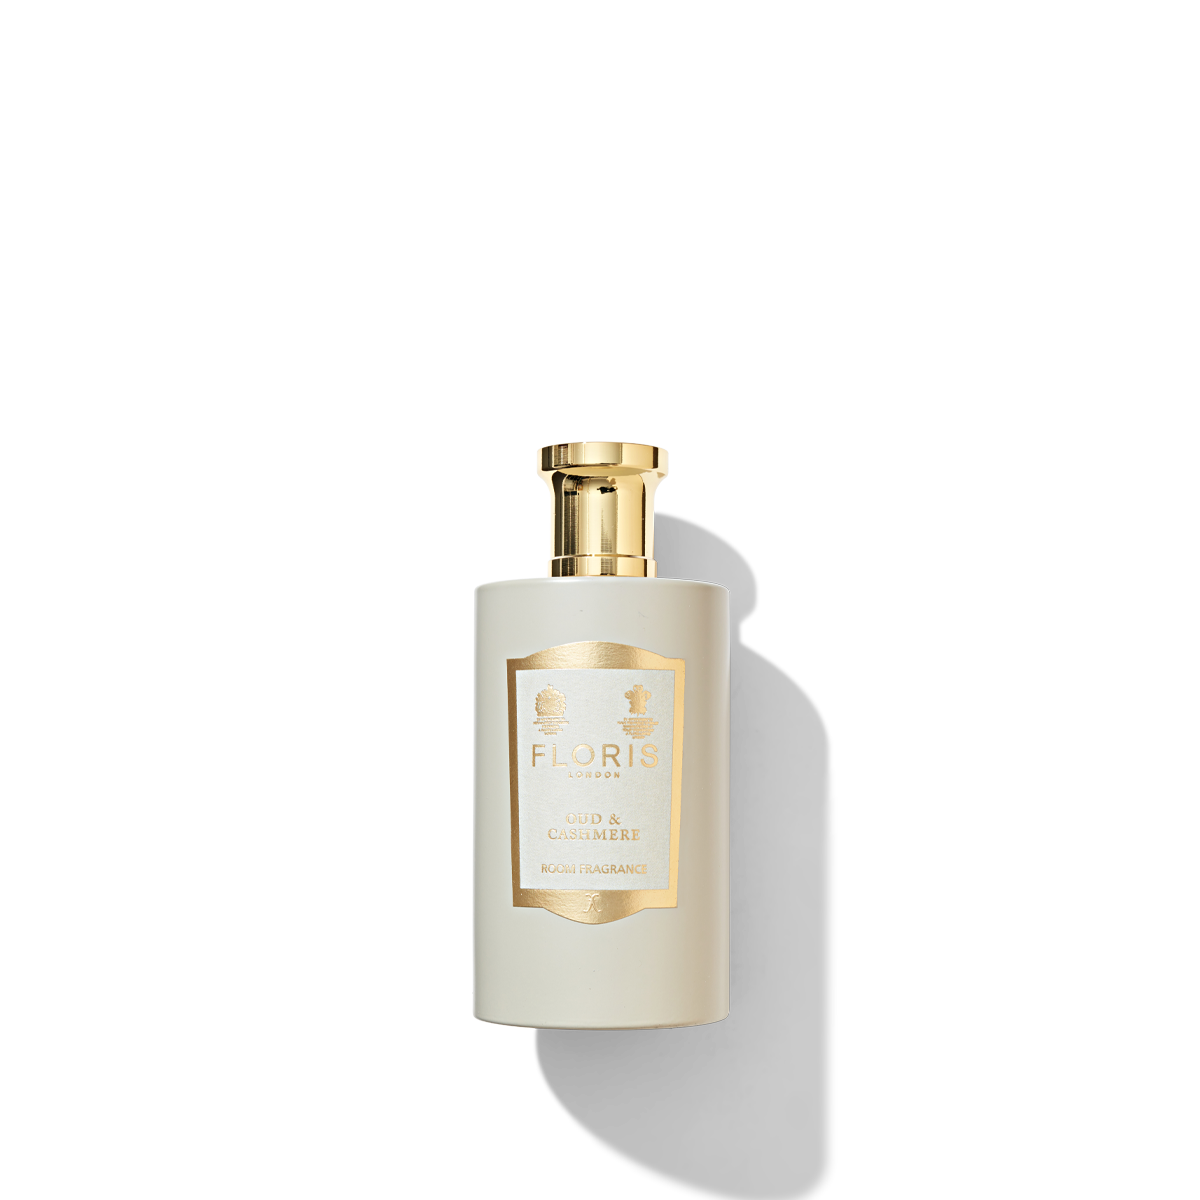 Oud & Cashmere Room Fragrance in a matte beige coloured glass with a cream and gold label and a shiny gold cap. 